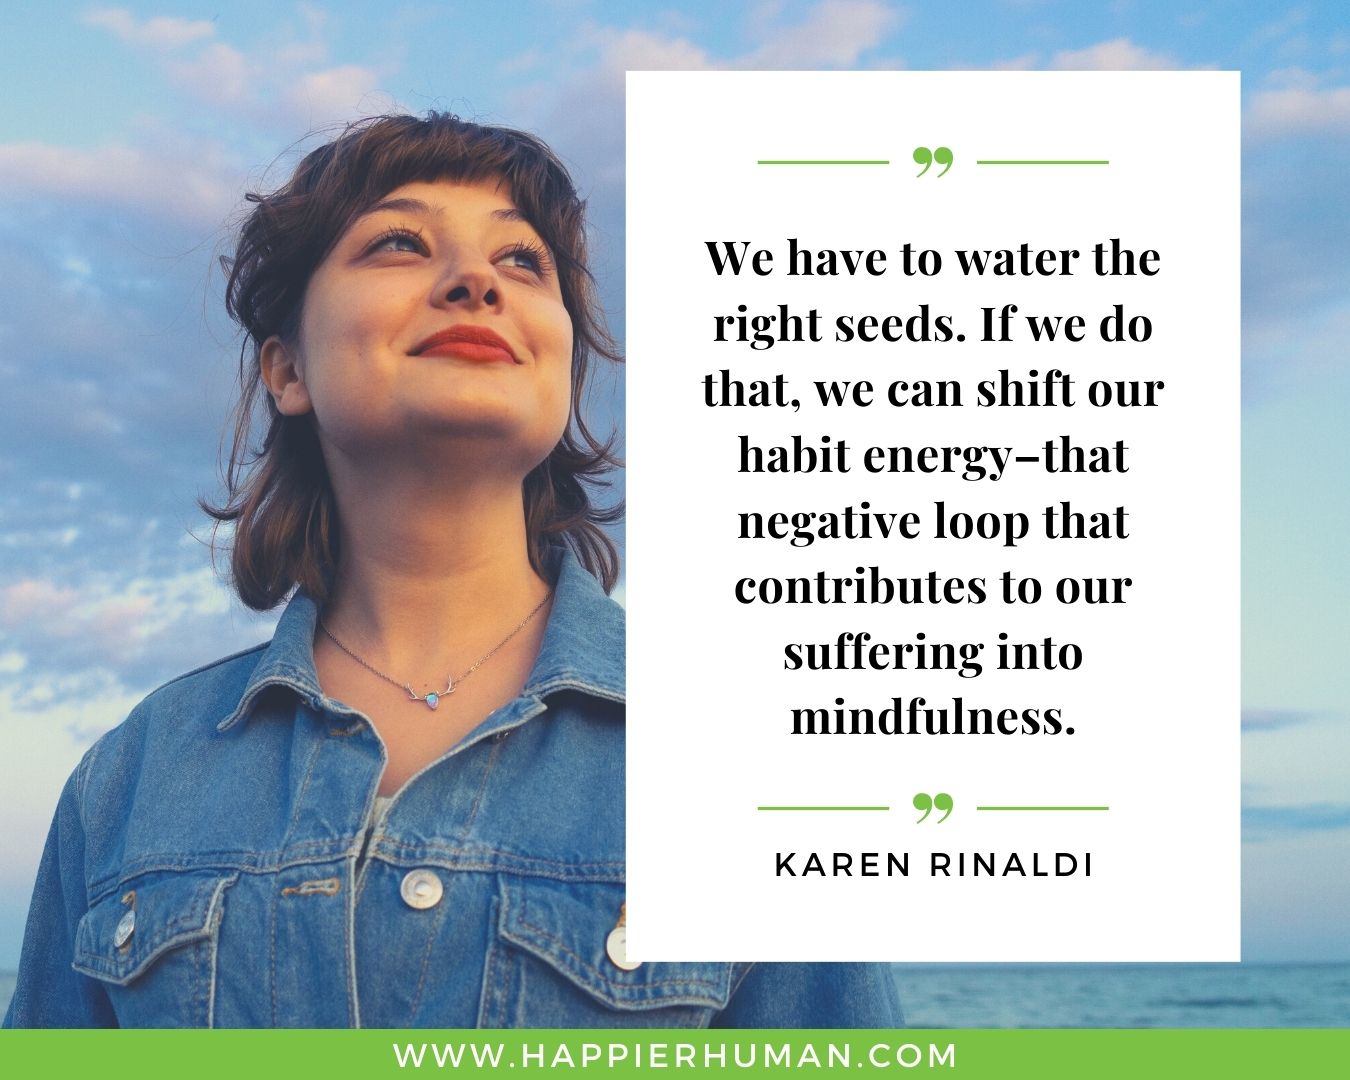 Positive Energy Quotes - “We have to water the right seeds. If we do that, we can shift our habit energy--that negative loop that contributes to our suffering into mindfulness.” - Karen Rinaldi